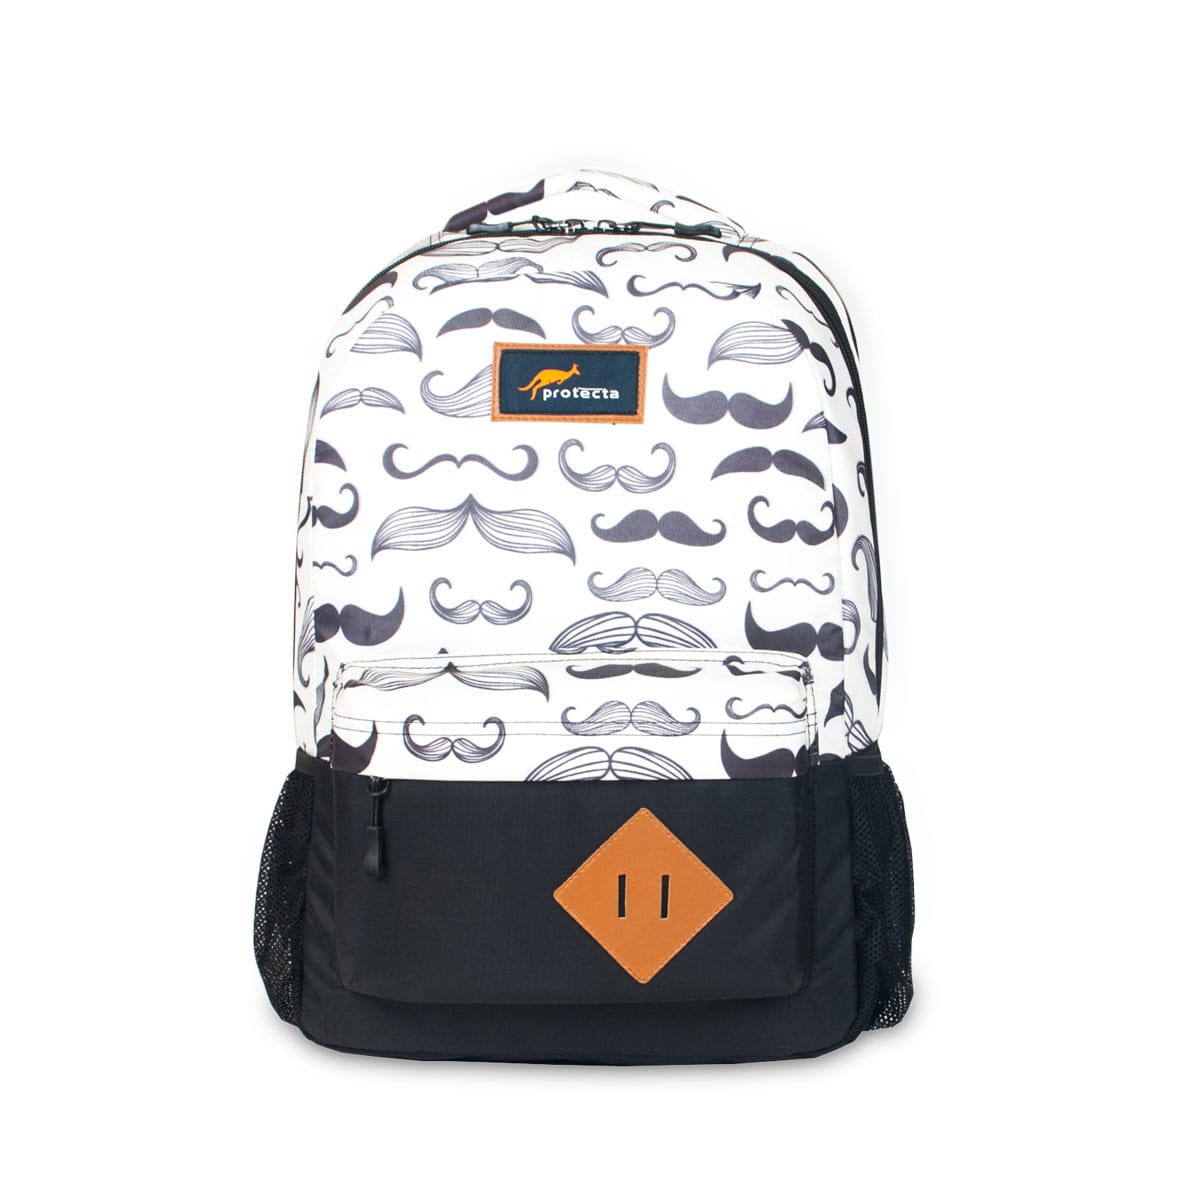 Too Mooch, Three Dot One Four School & College Backpack-Main